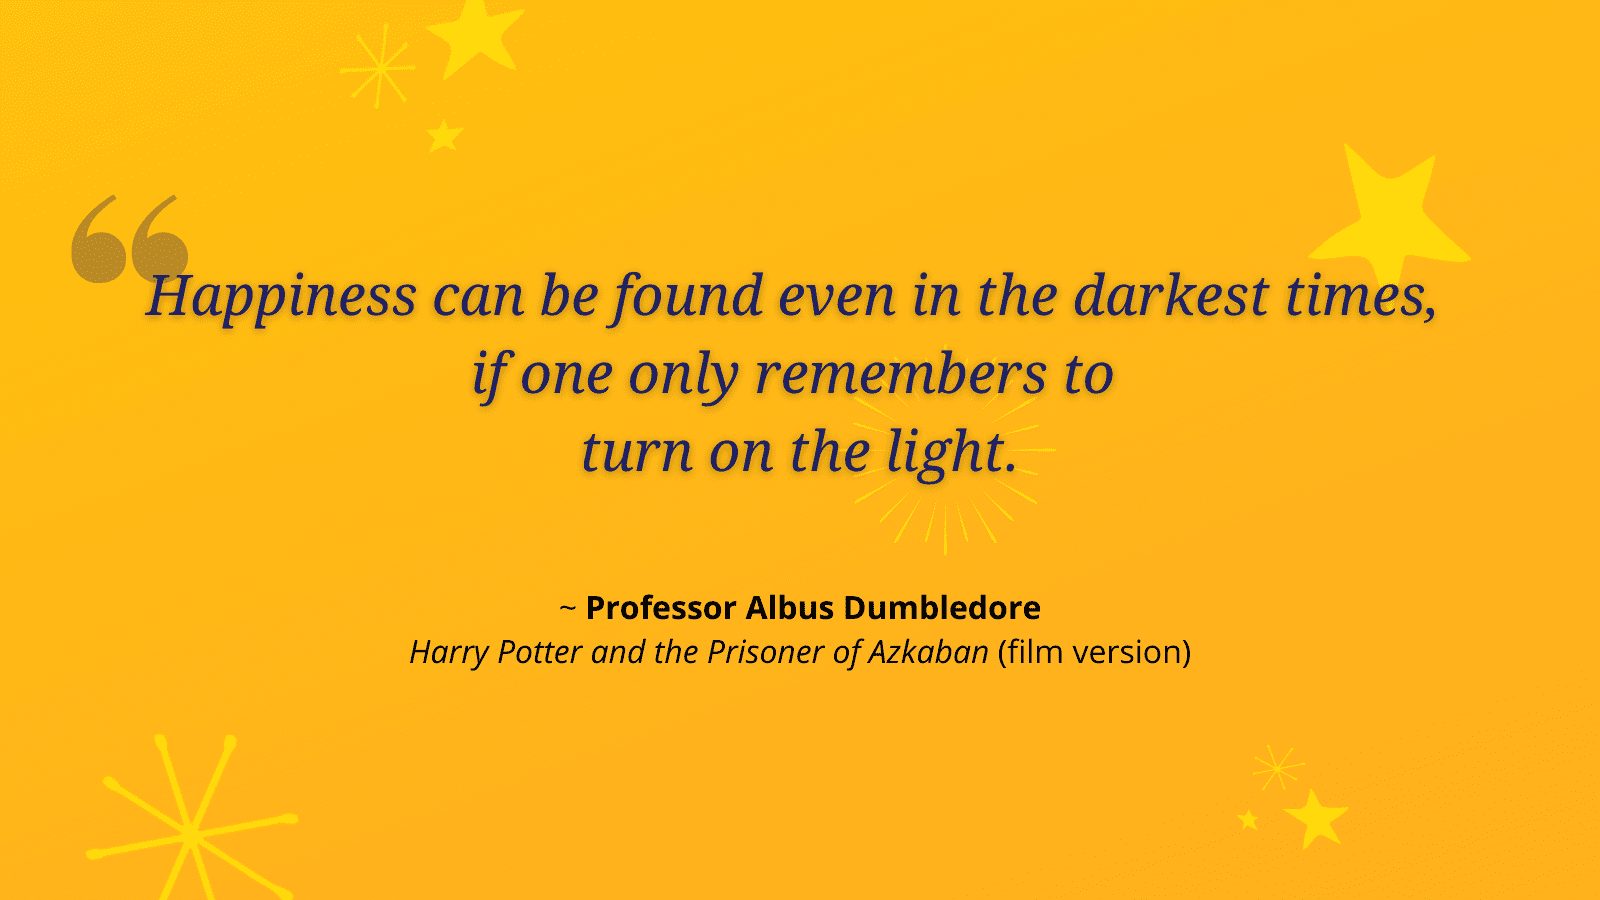 Over bright yellow background: "Happiness can be found even in the darkest times, if one only remembers to turn on the light" - Professor Albus Dumbledore